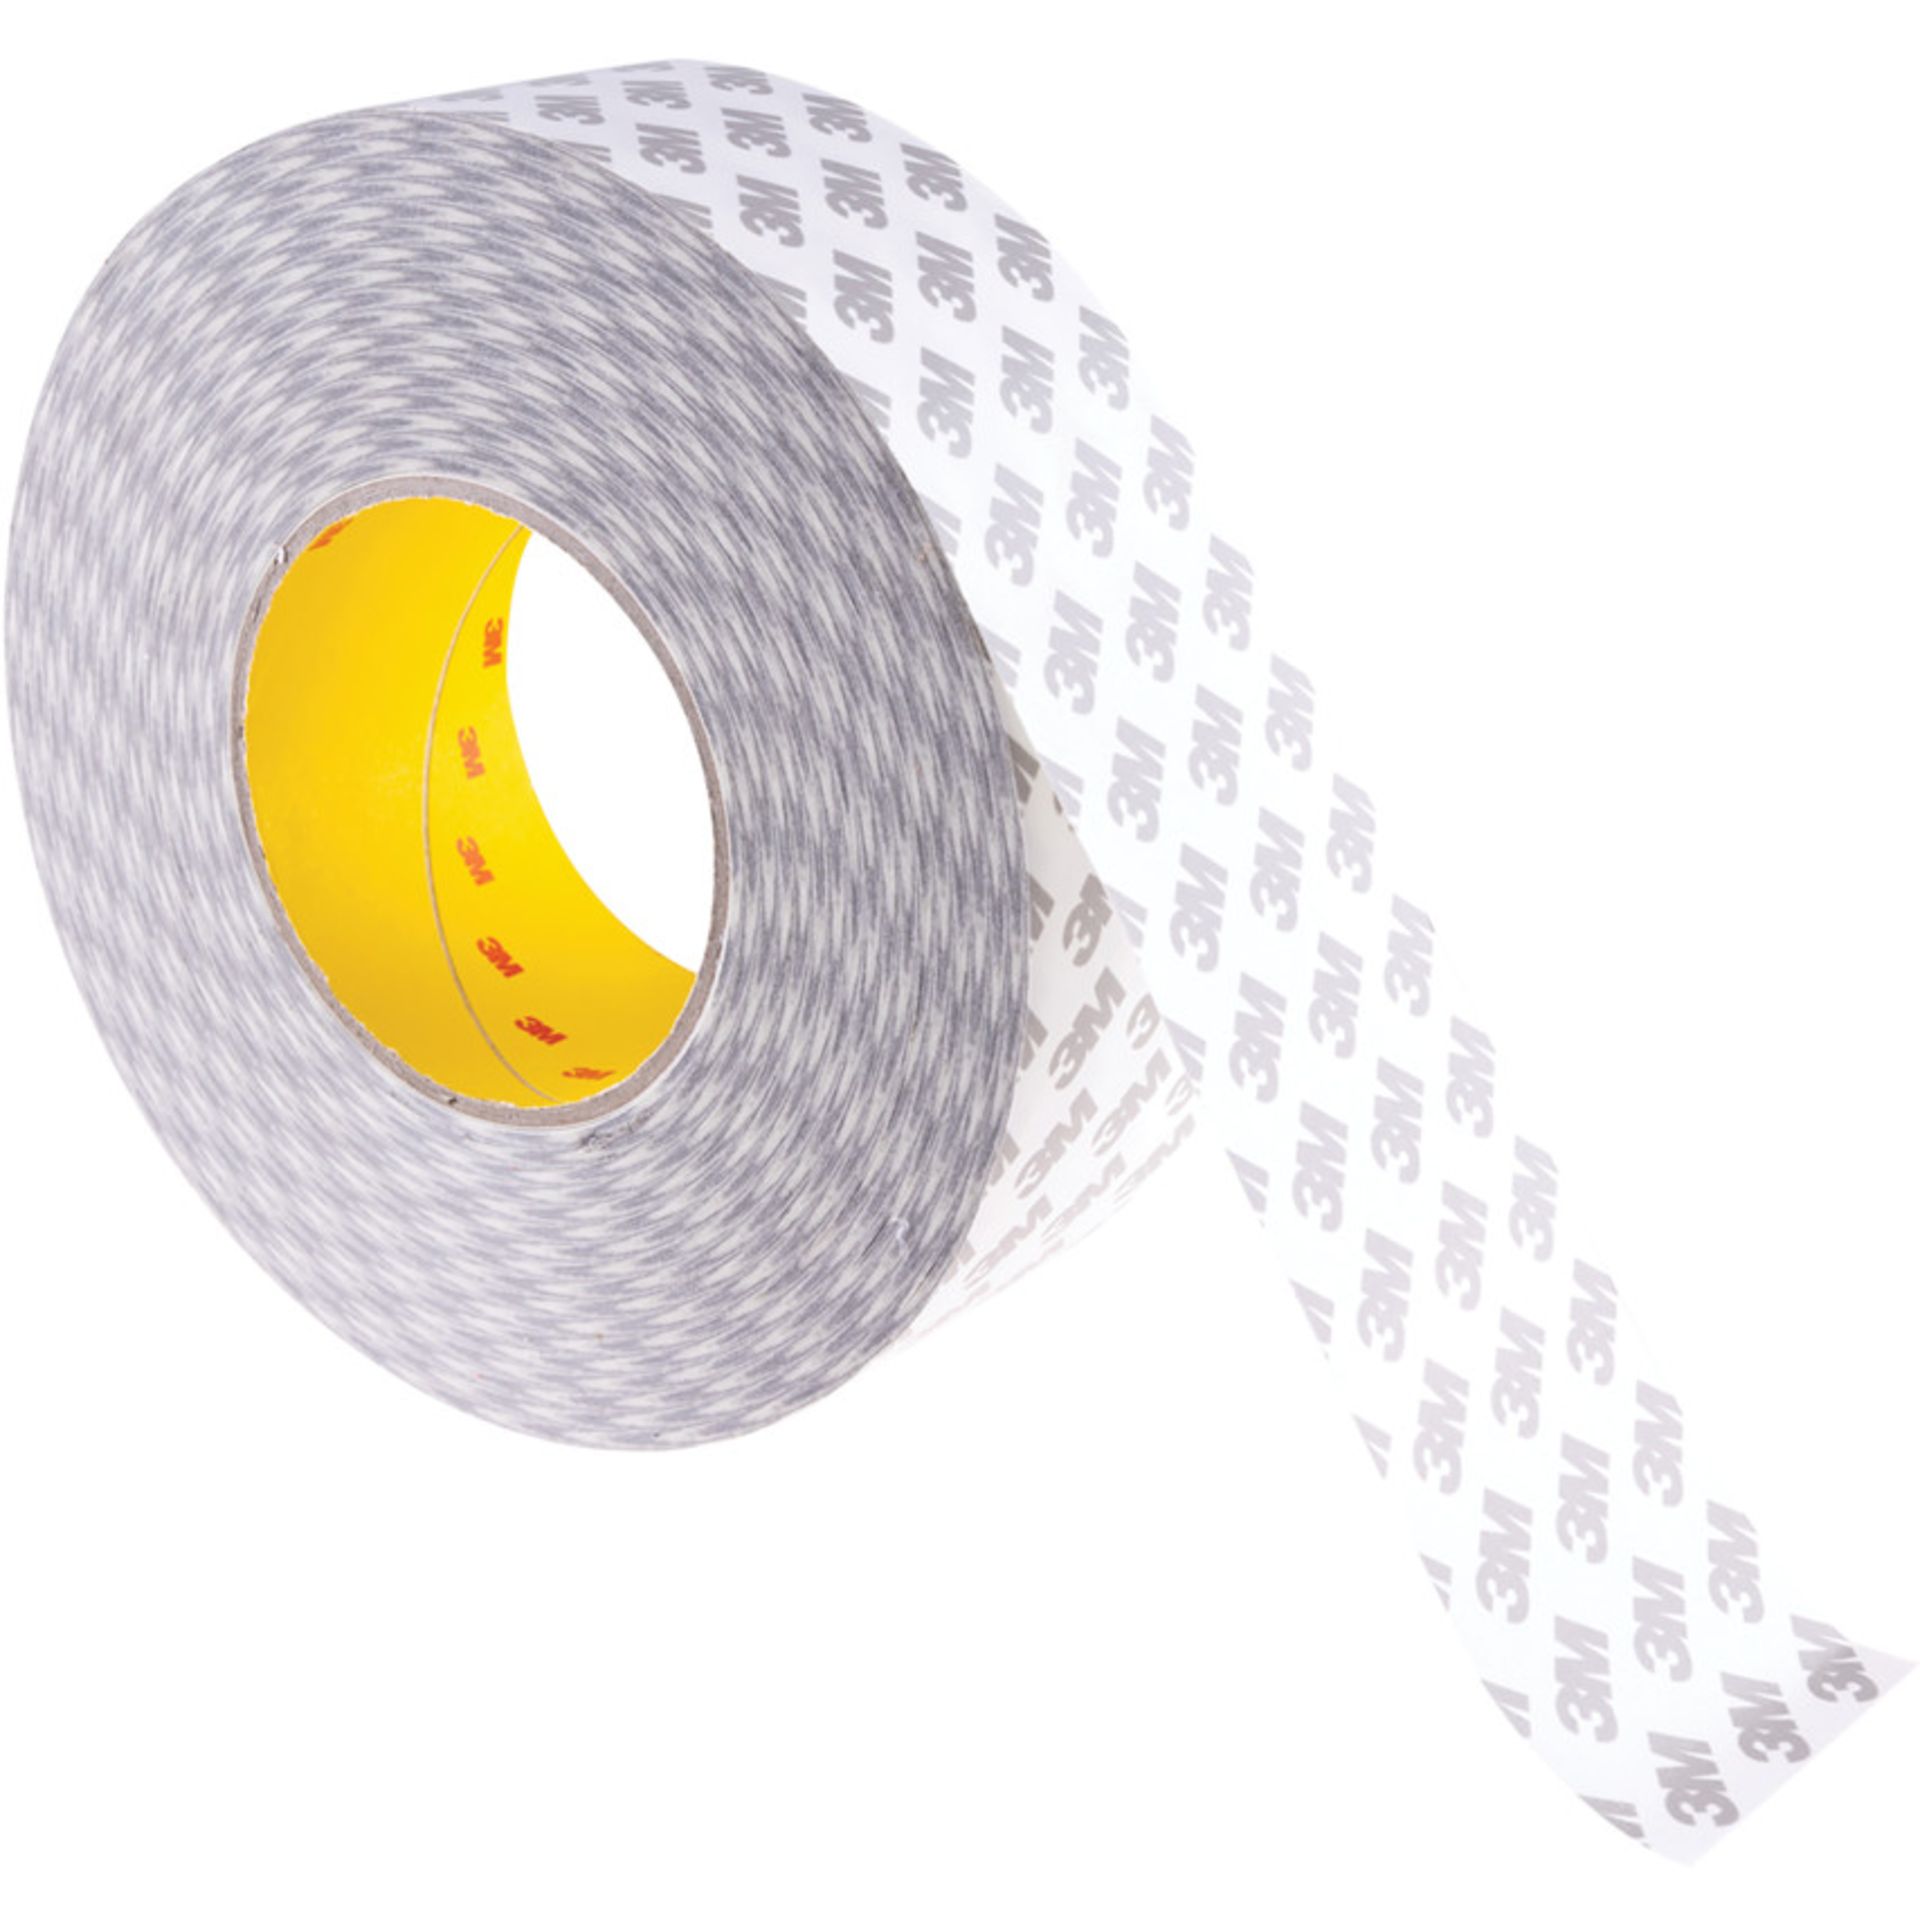 12 Rolls of 25mm 3M 9080 Double Sided Tape Non Woven High Bond RRP£200+ - Image 3 of 3